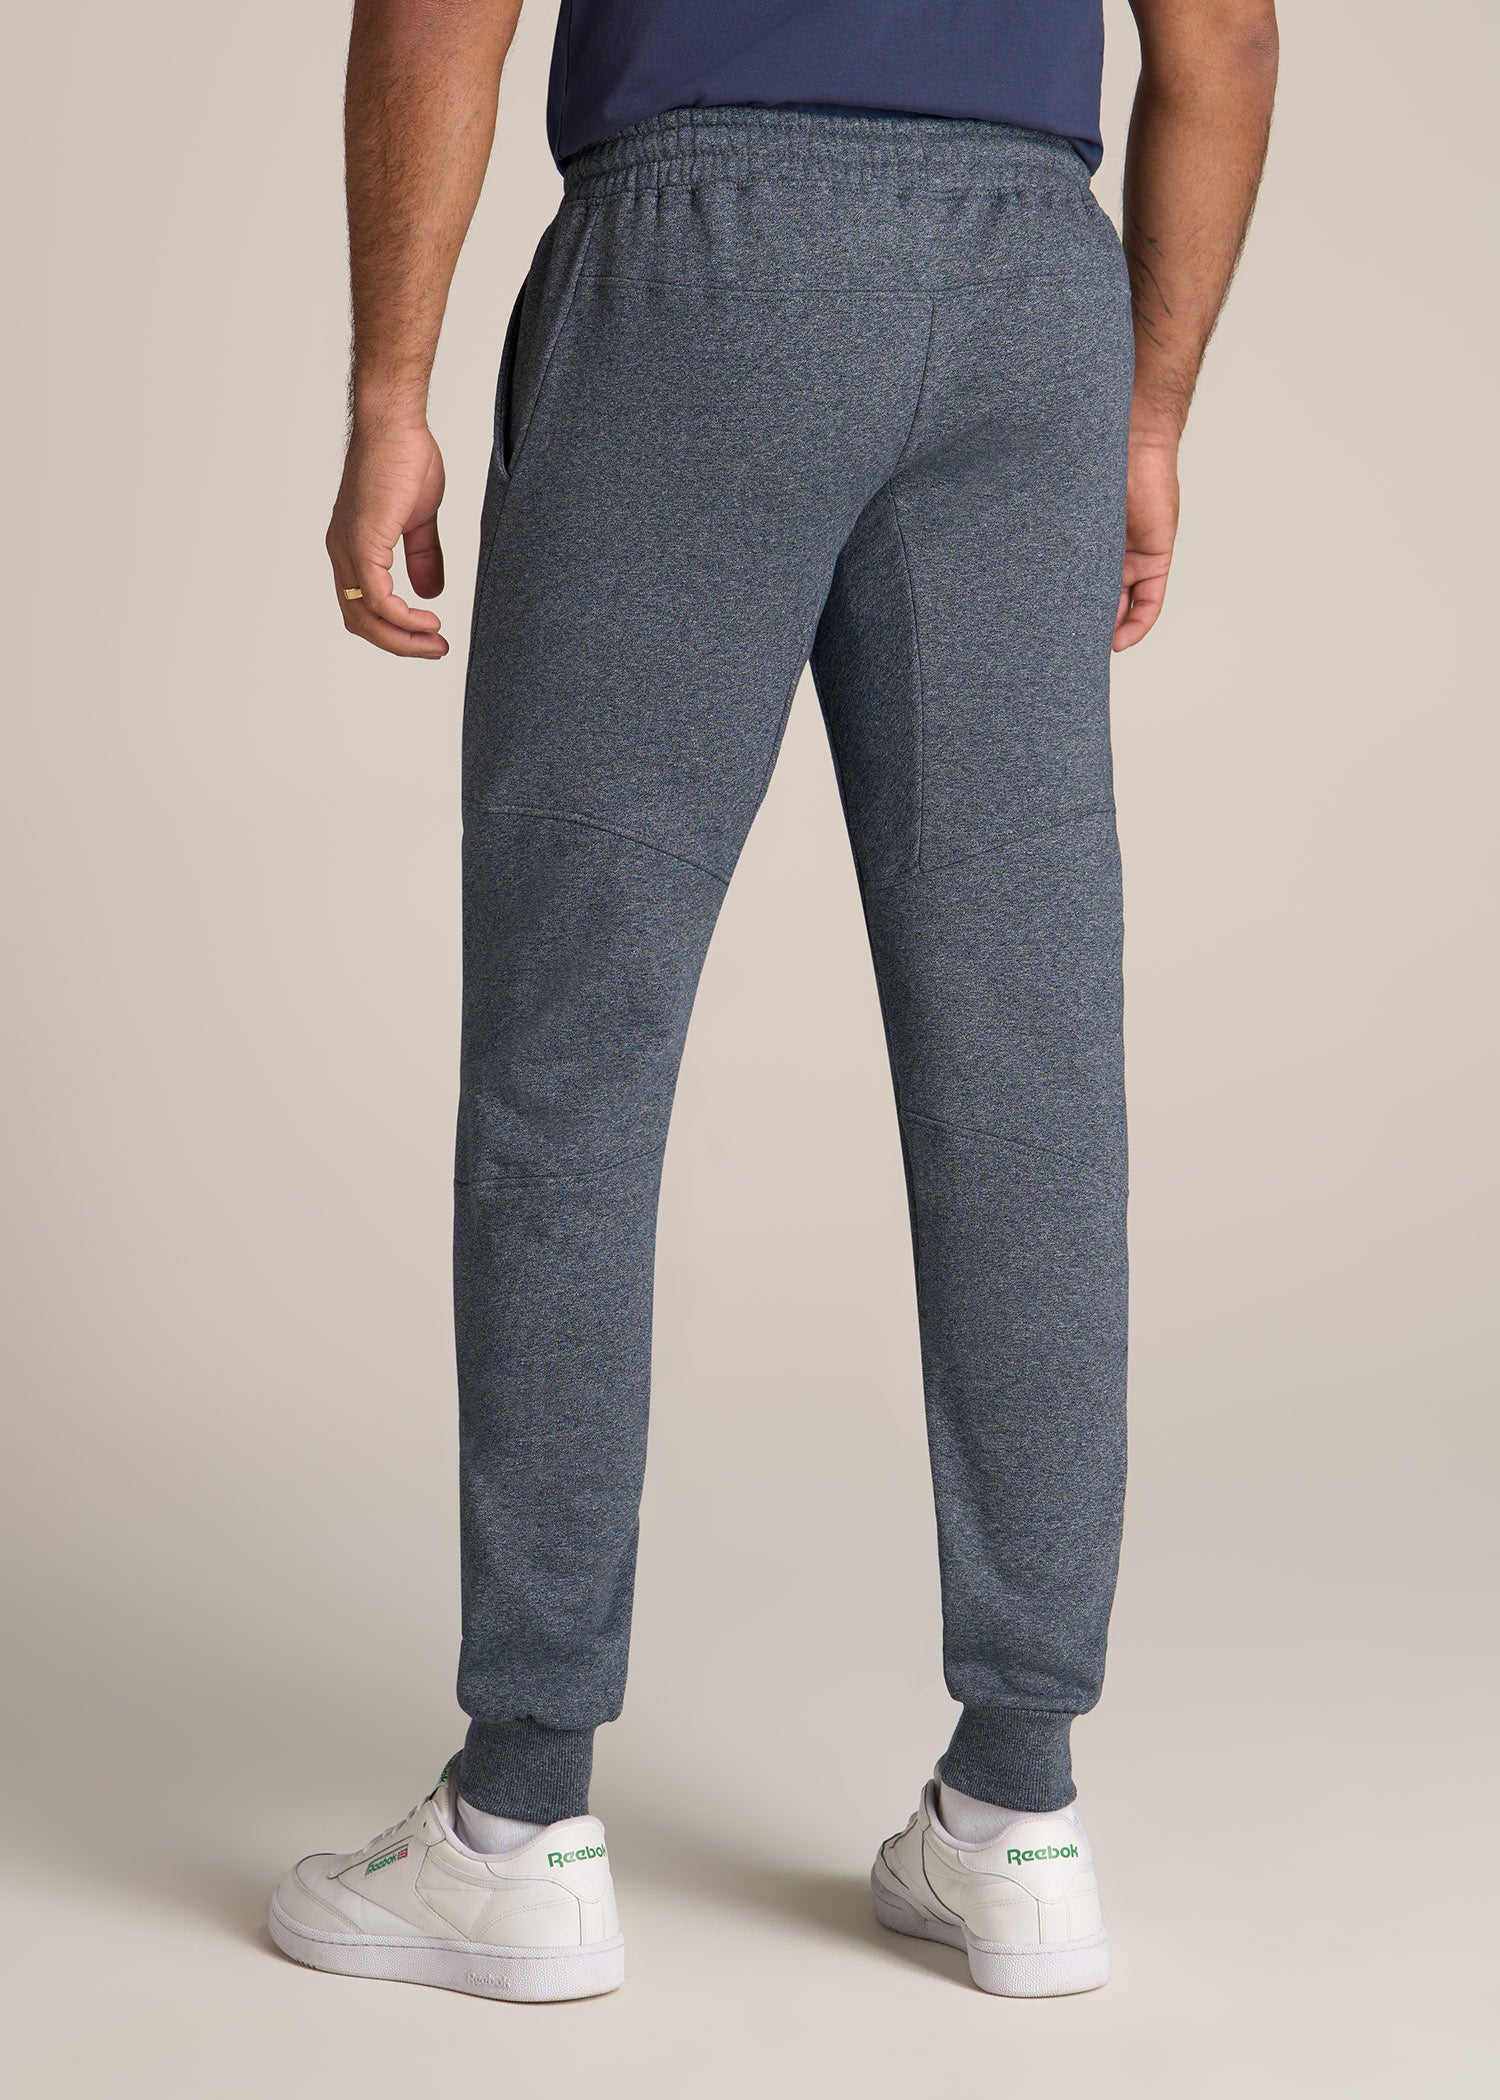 Reebok Men's Sweatpants - Lightweight Classic Fit Open Bottom Sweatpants  (S-XL), Size Small, Heather Grey at  Men's Clothing store